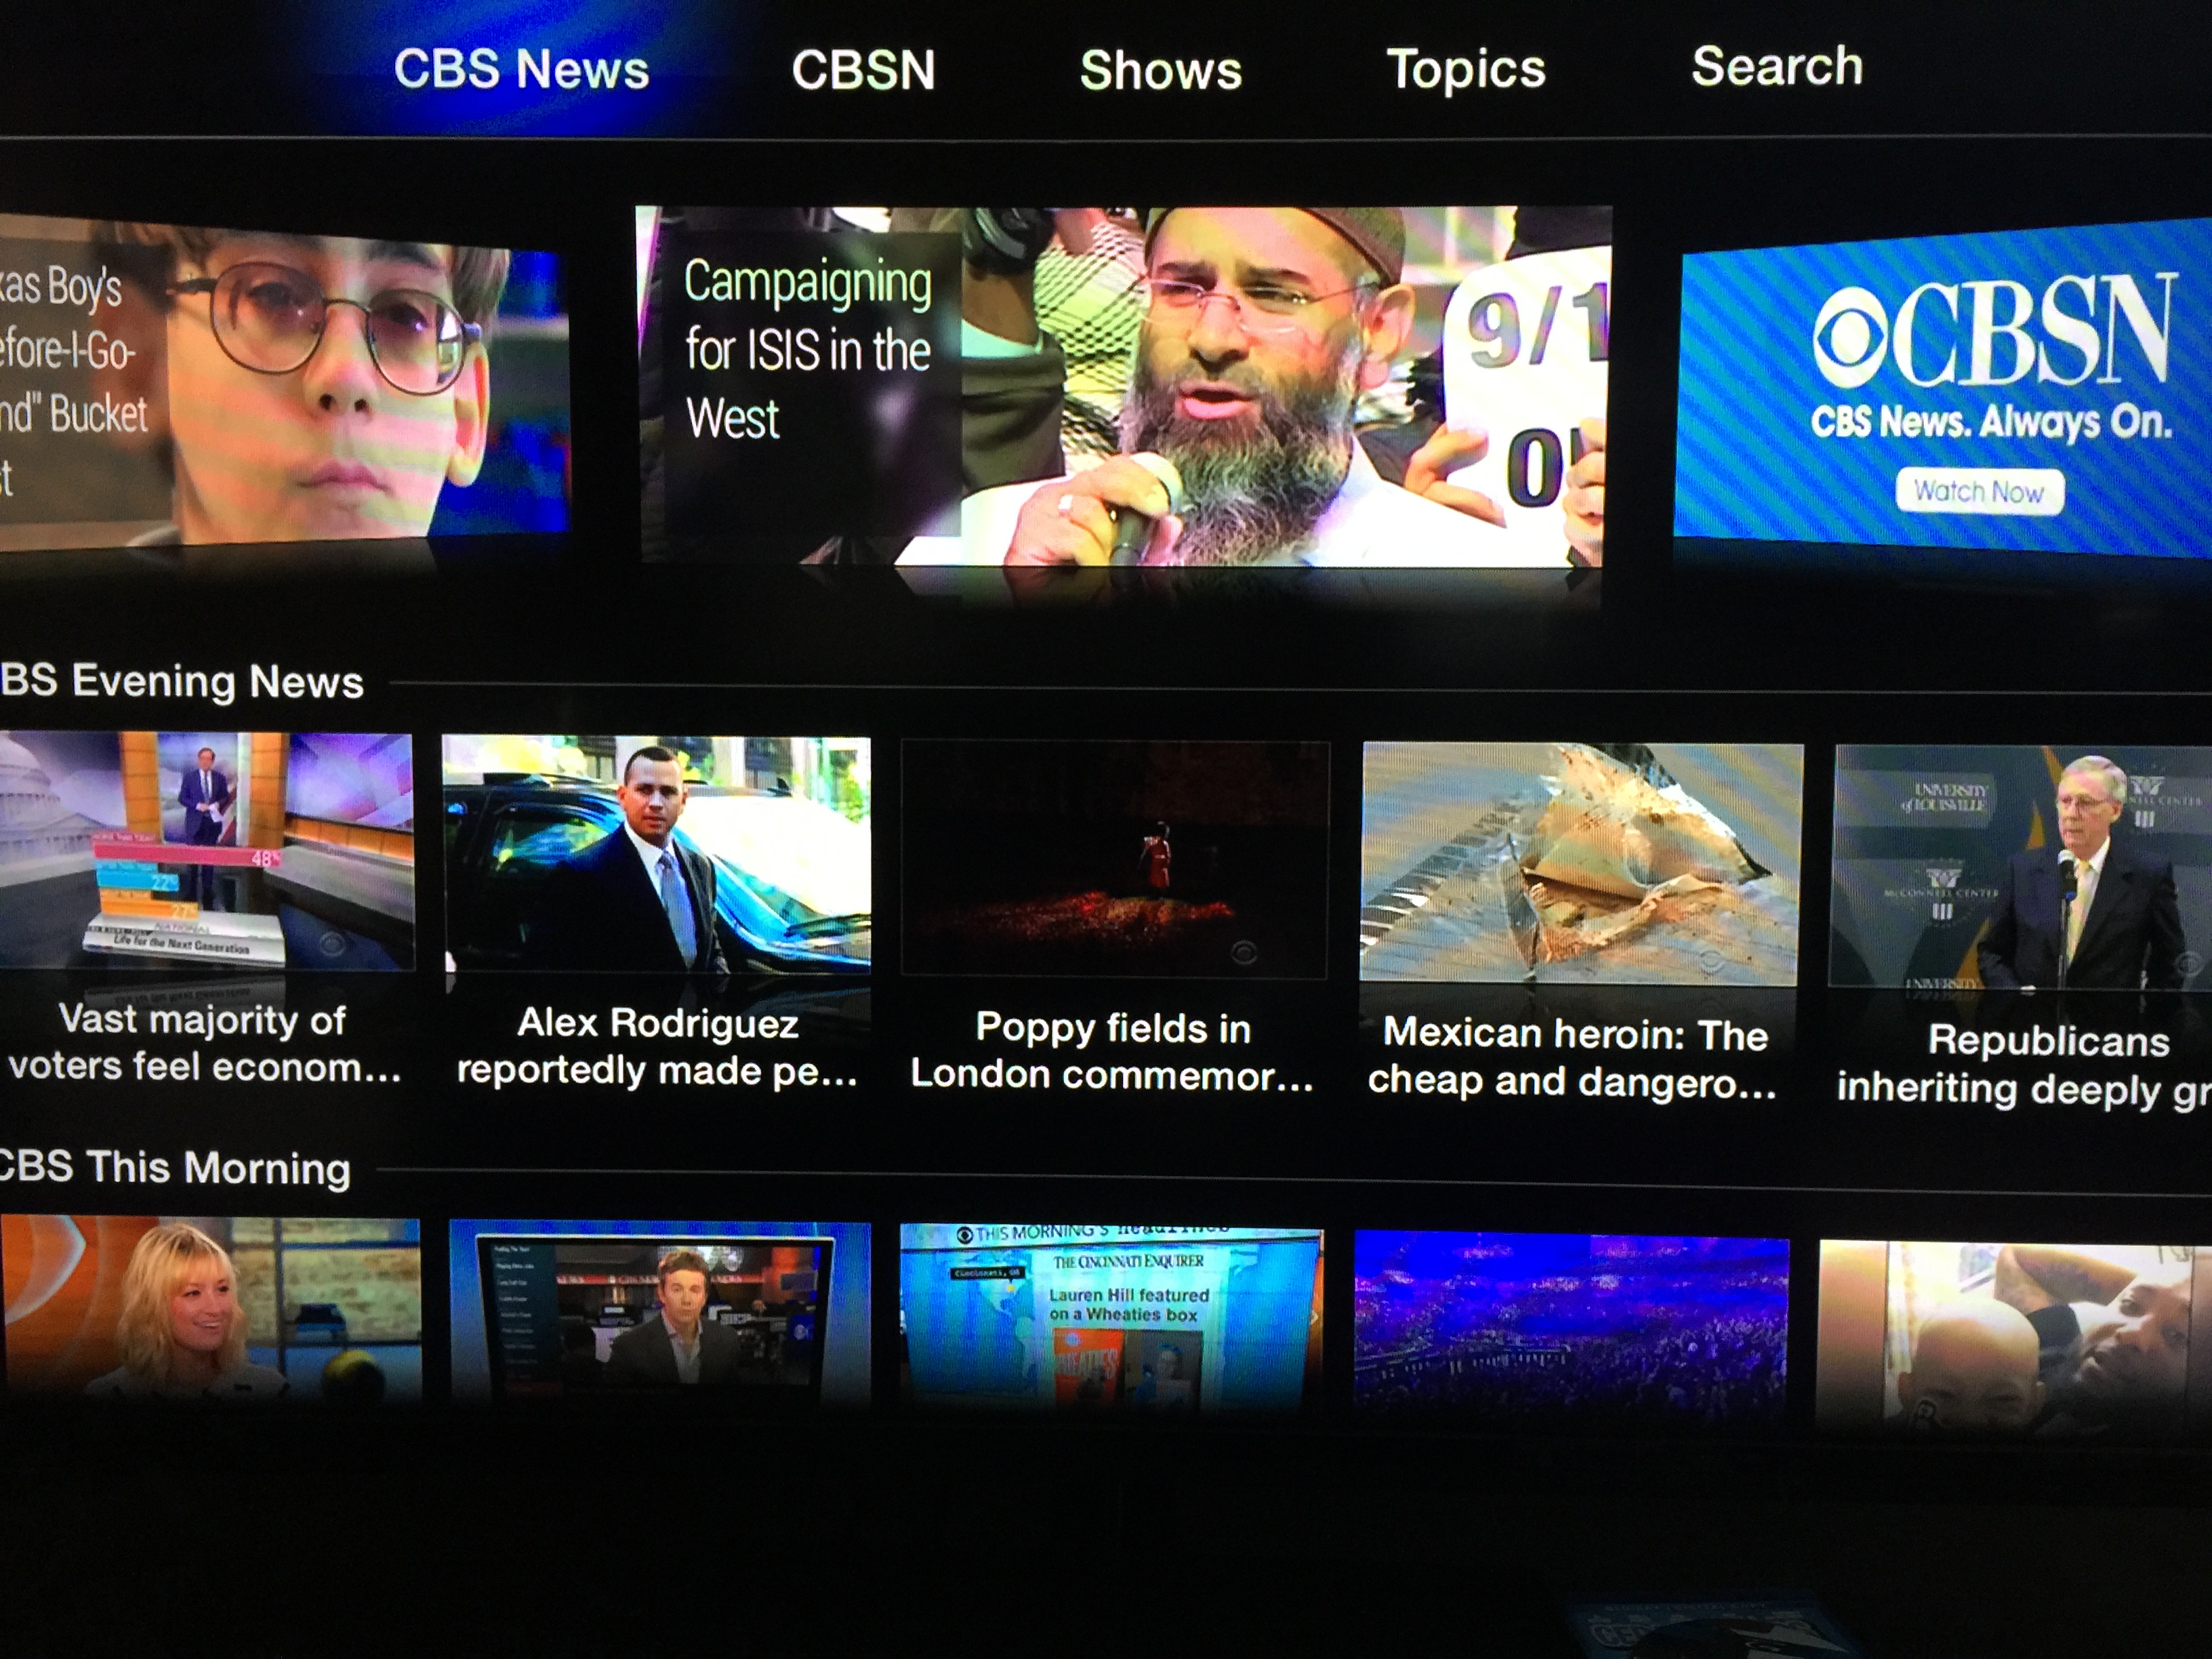 Apple TV updated new CBS News channel